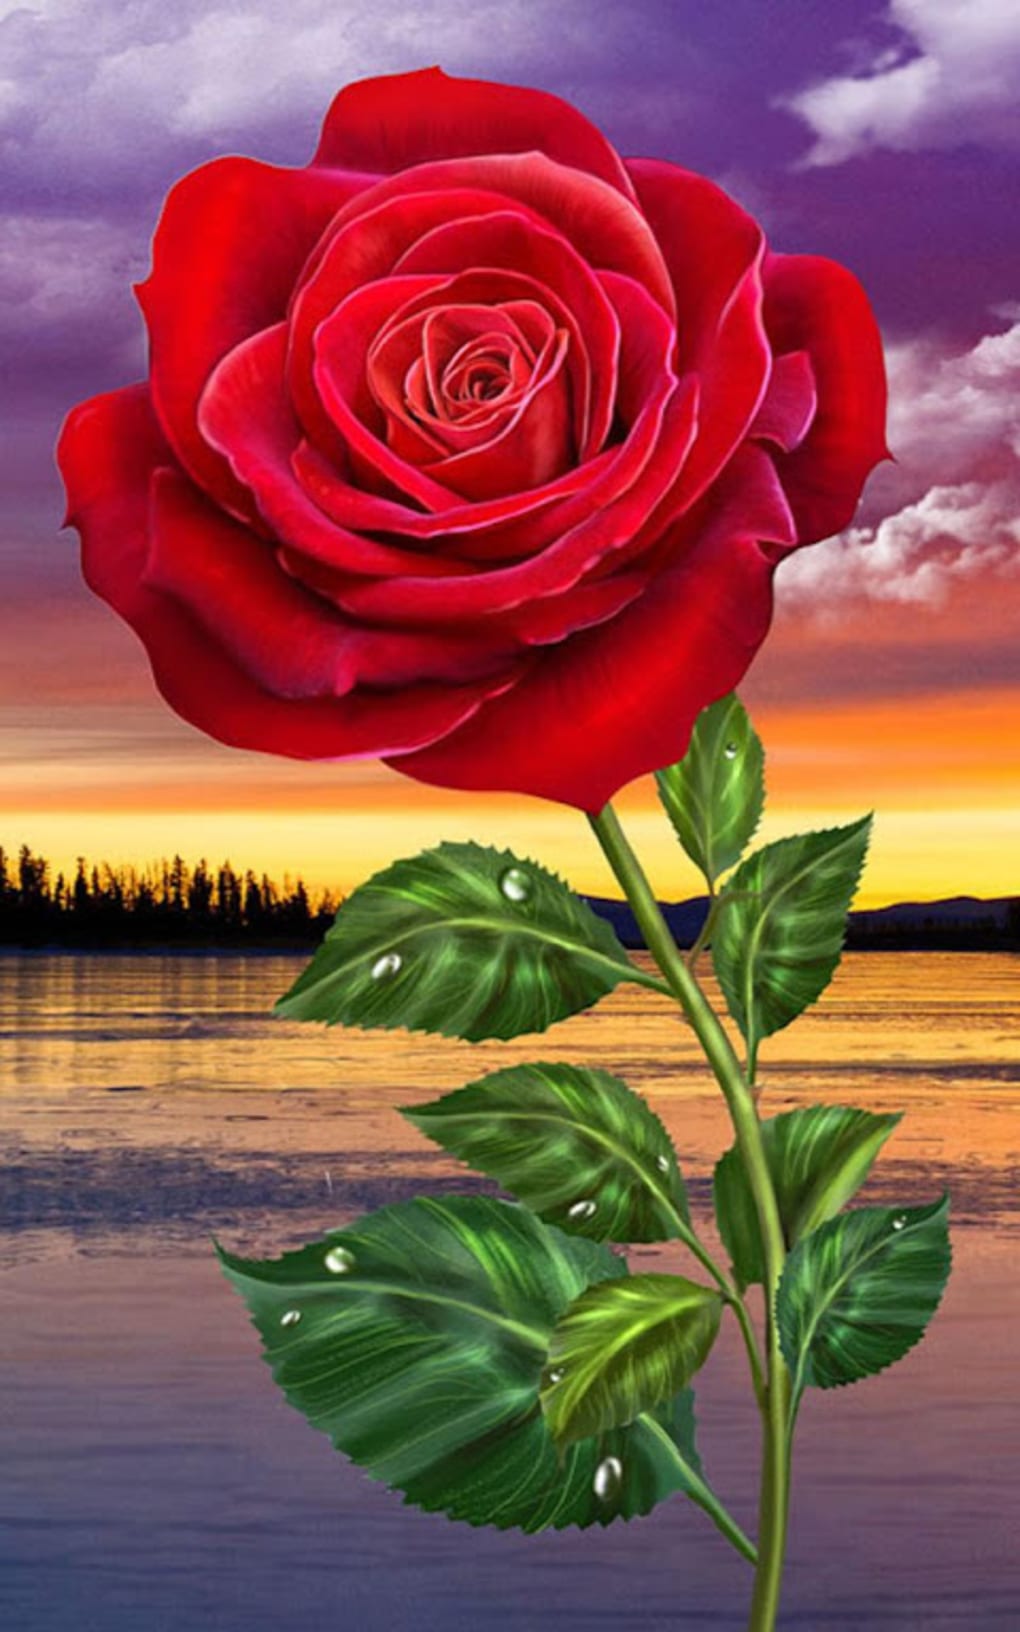 Hd Rose Flowers Live Wallpaper For